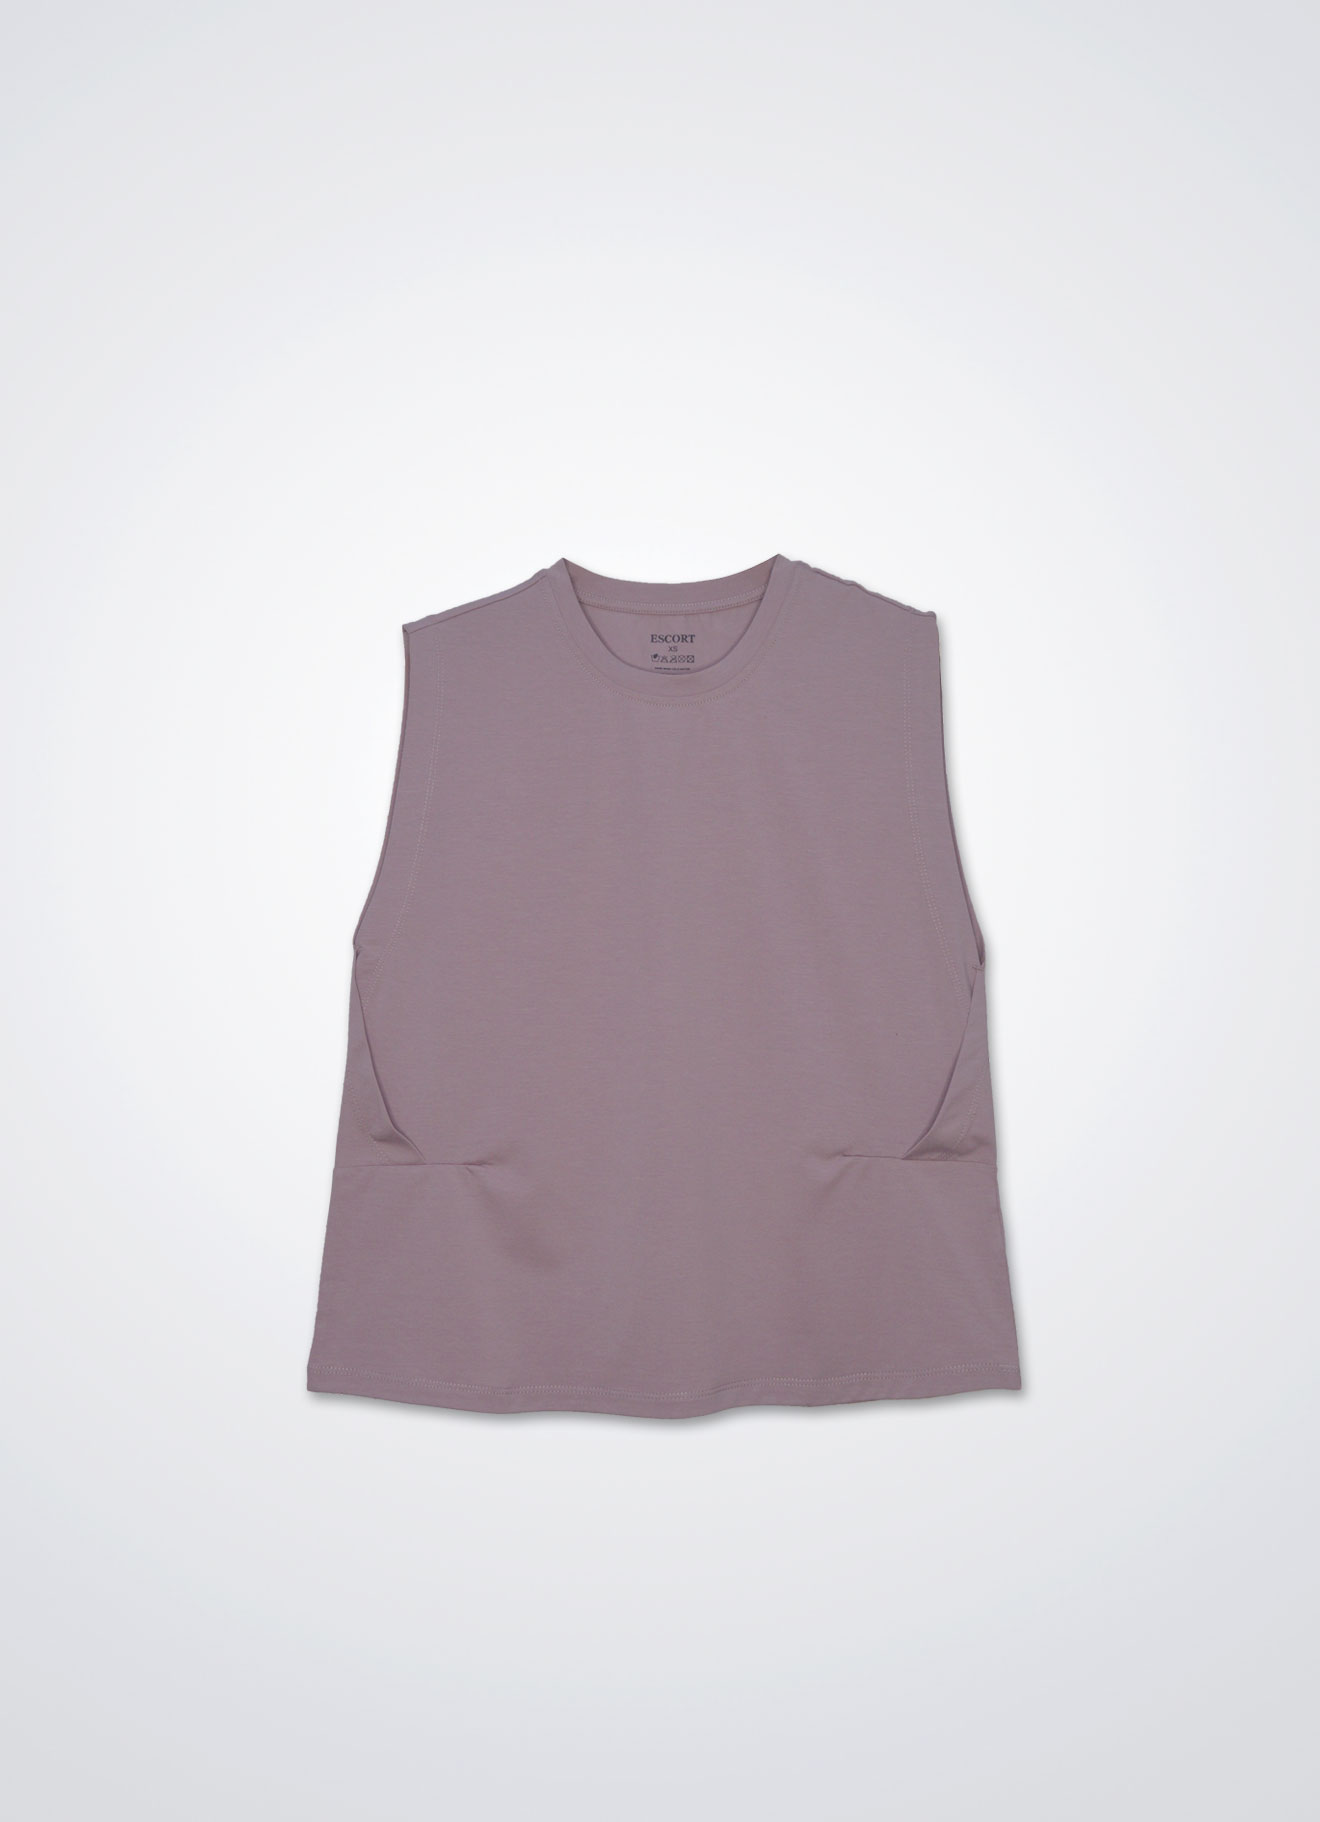 Burnished-Lilac by Sleeveless Top